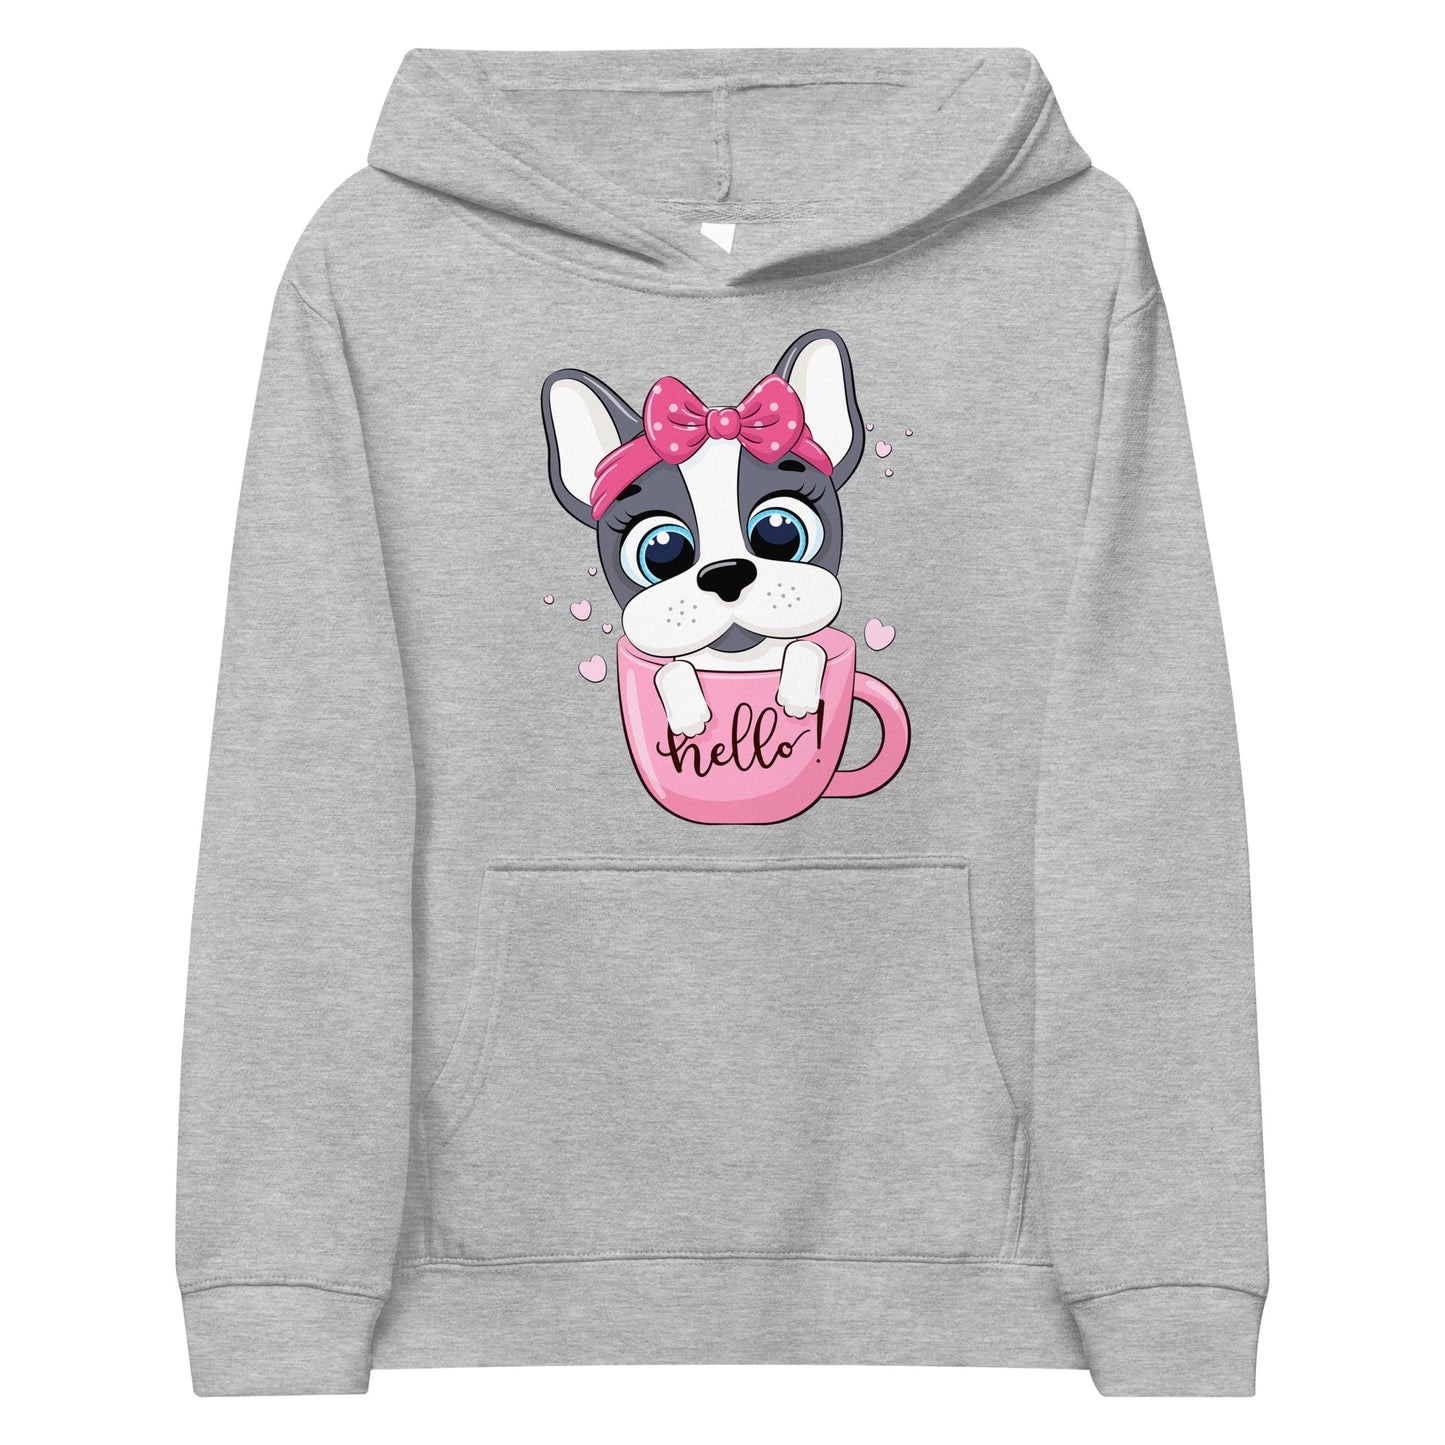 Cute Puppy Dog in Cup Hoodie, No. 0371